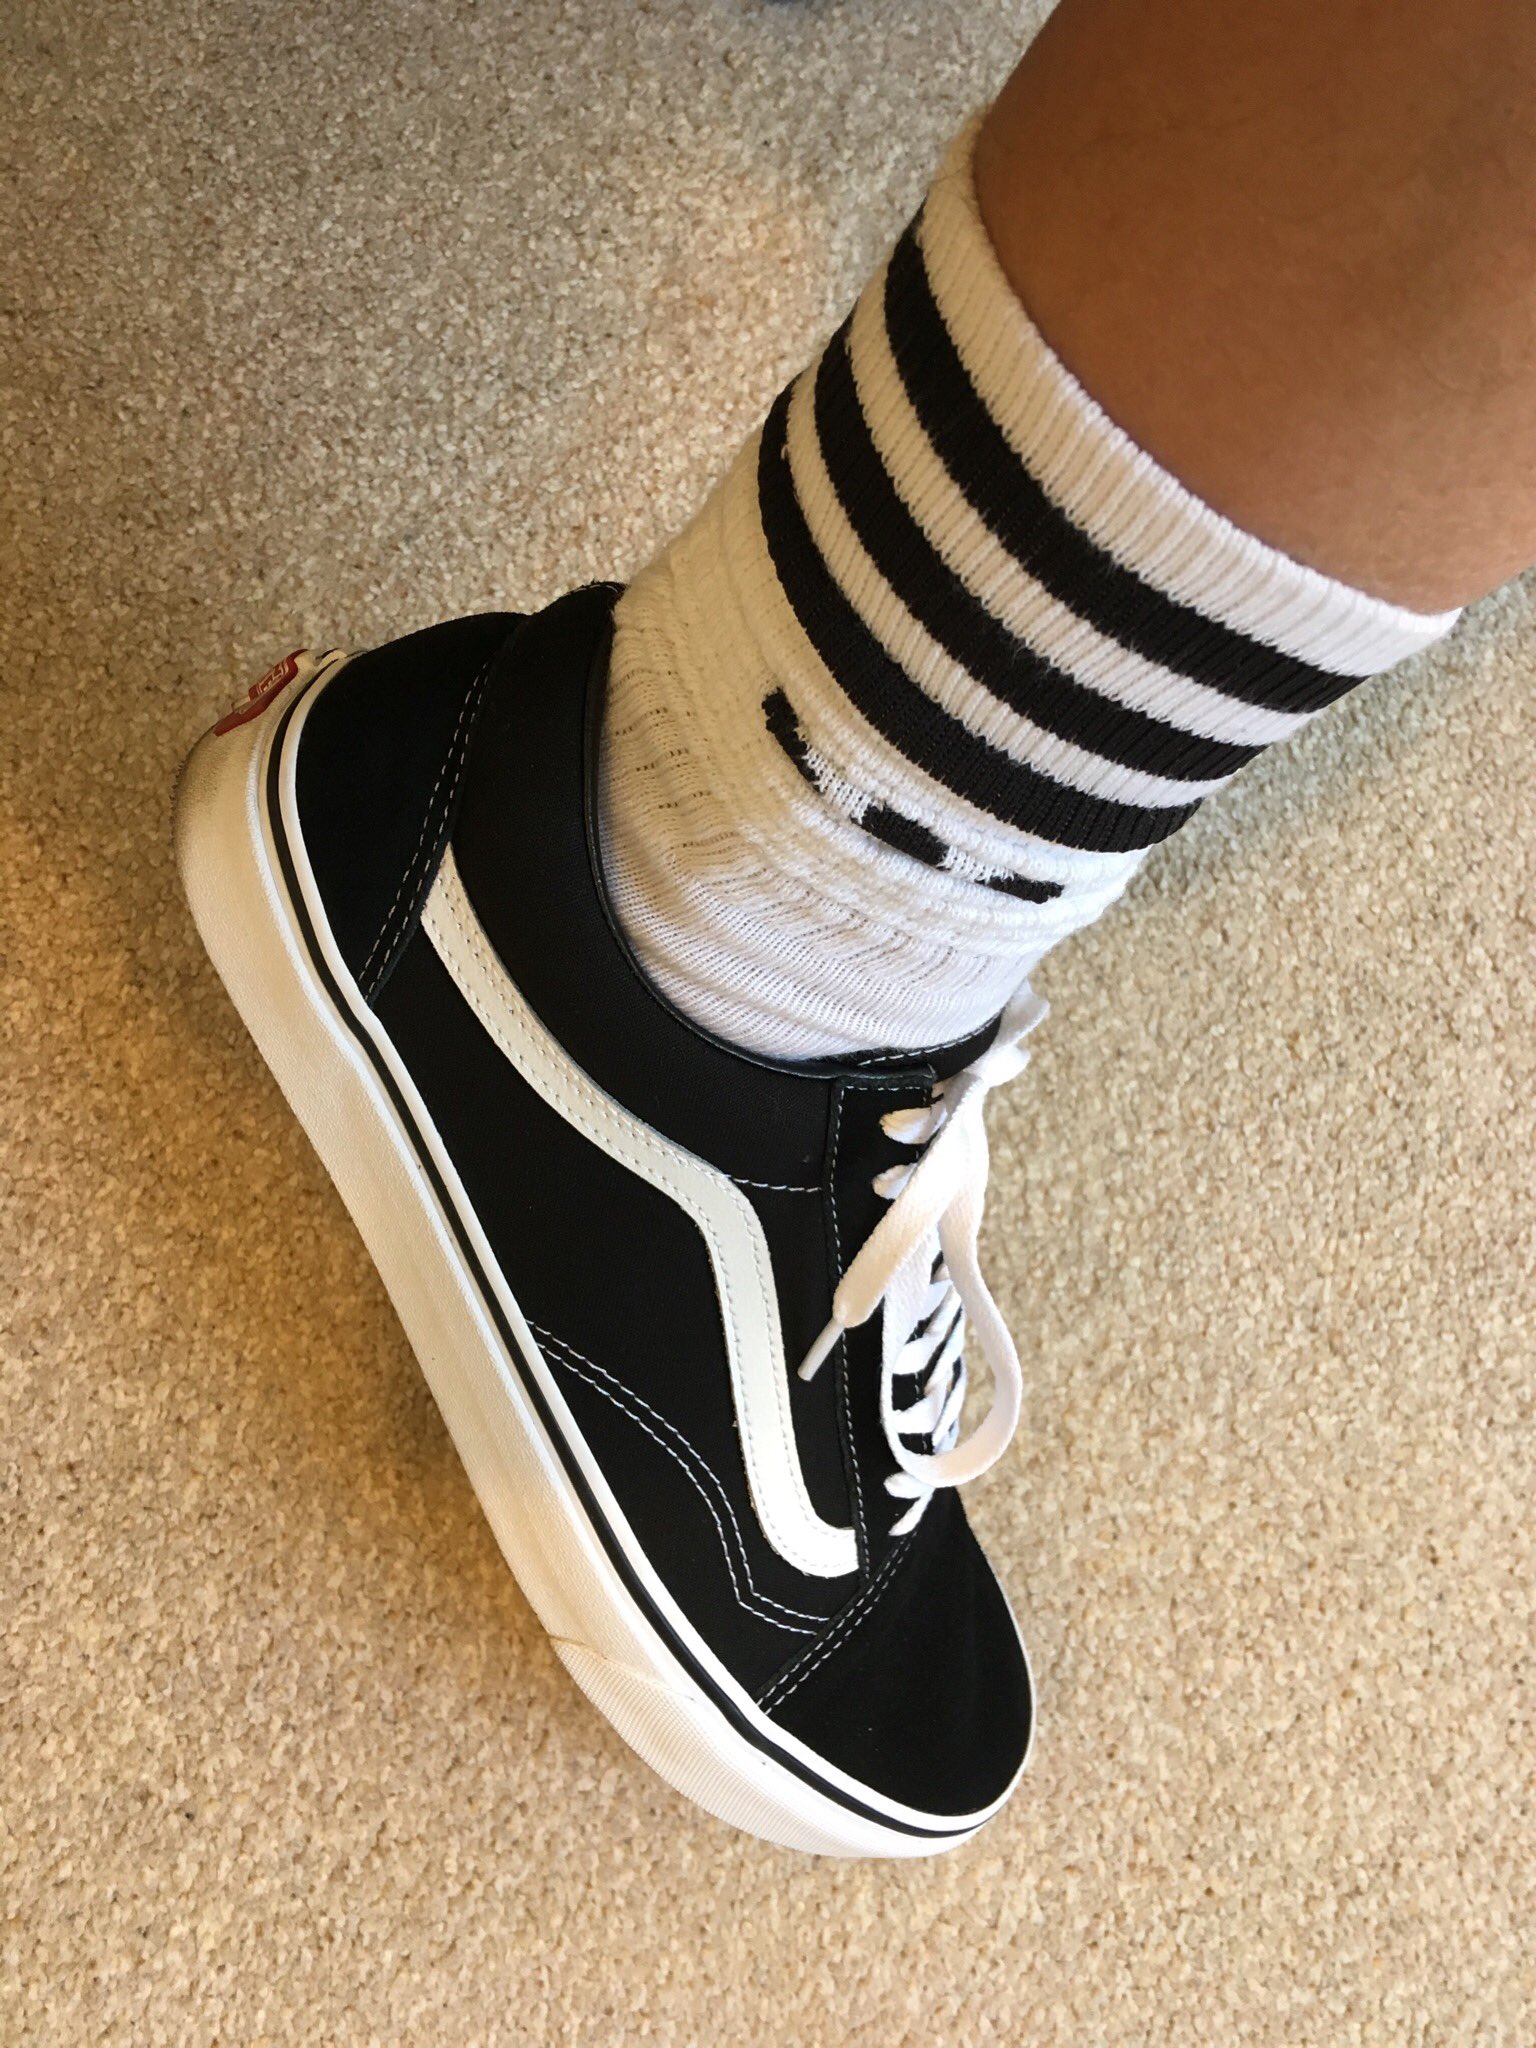 Lee 🇬🇧👟🧢🧦 on Twitter: "My mate @trainerboi23 said the new Adidas socks would look good with Vans. I :) /